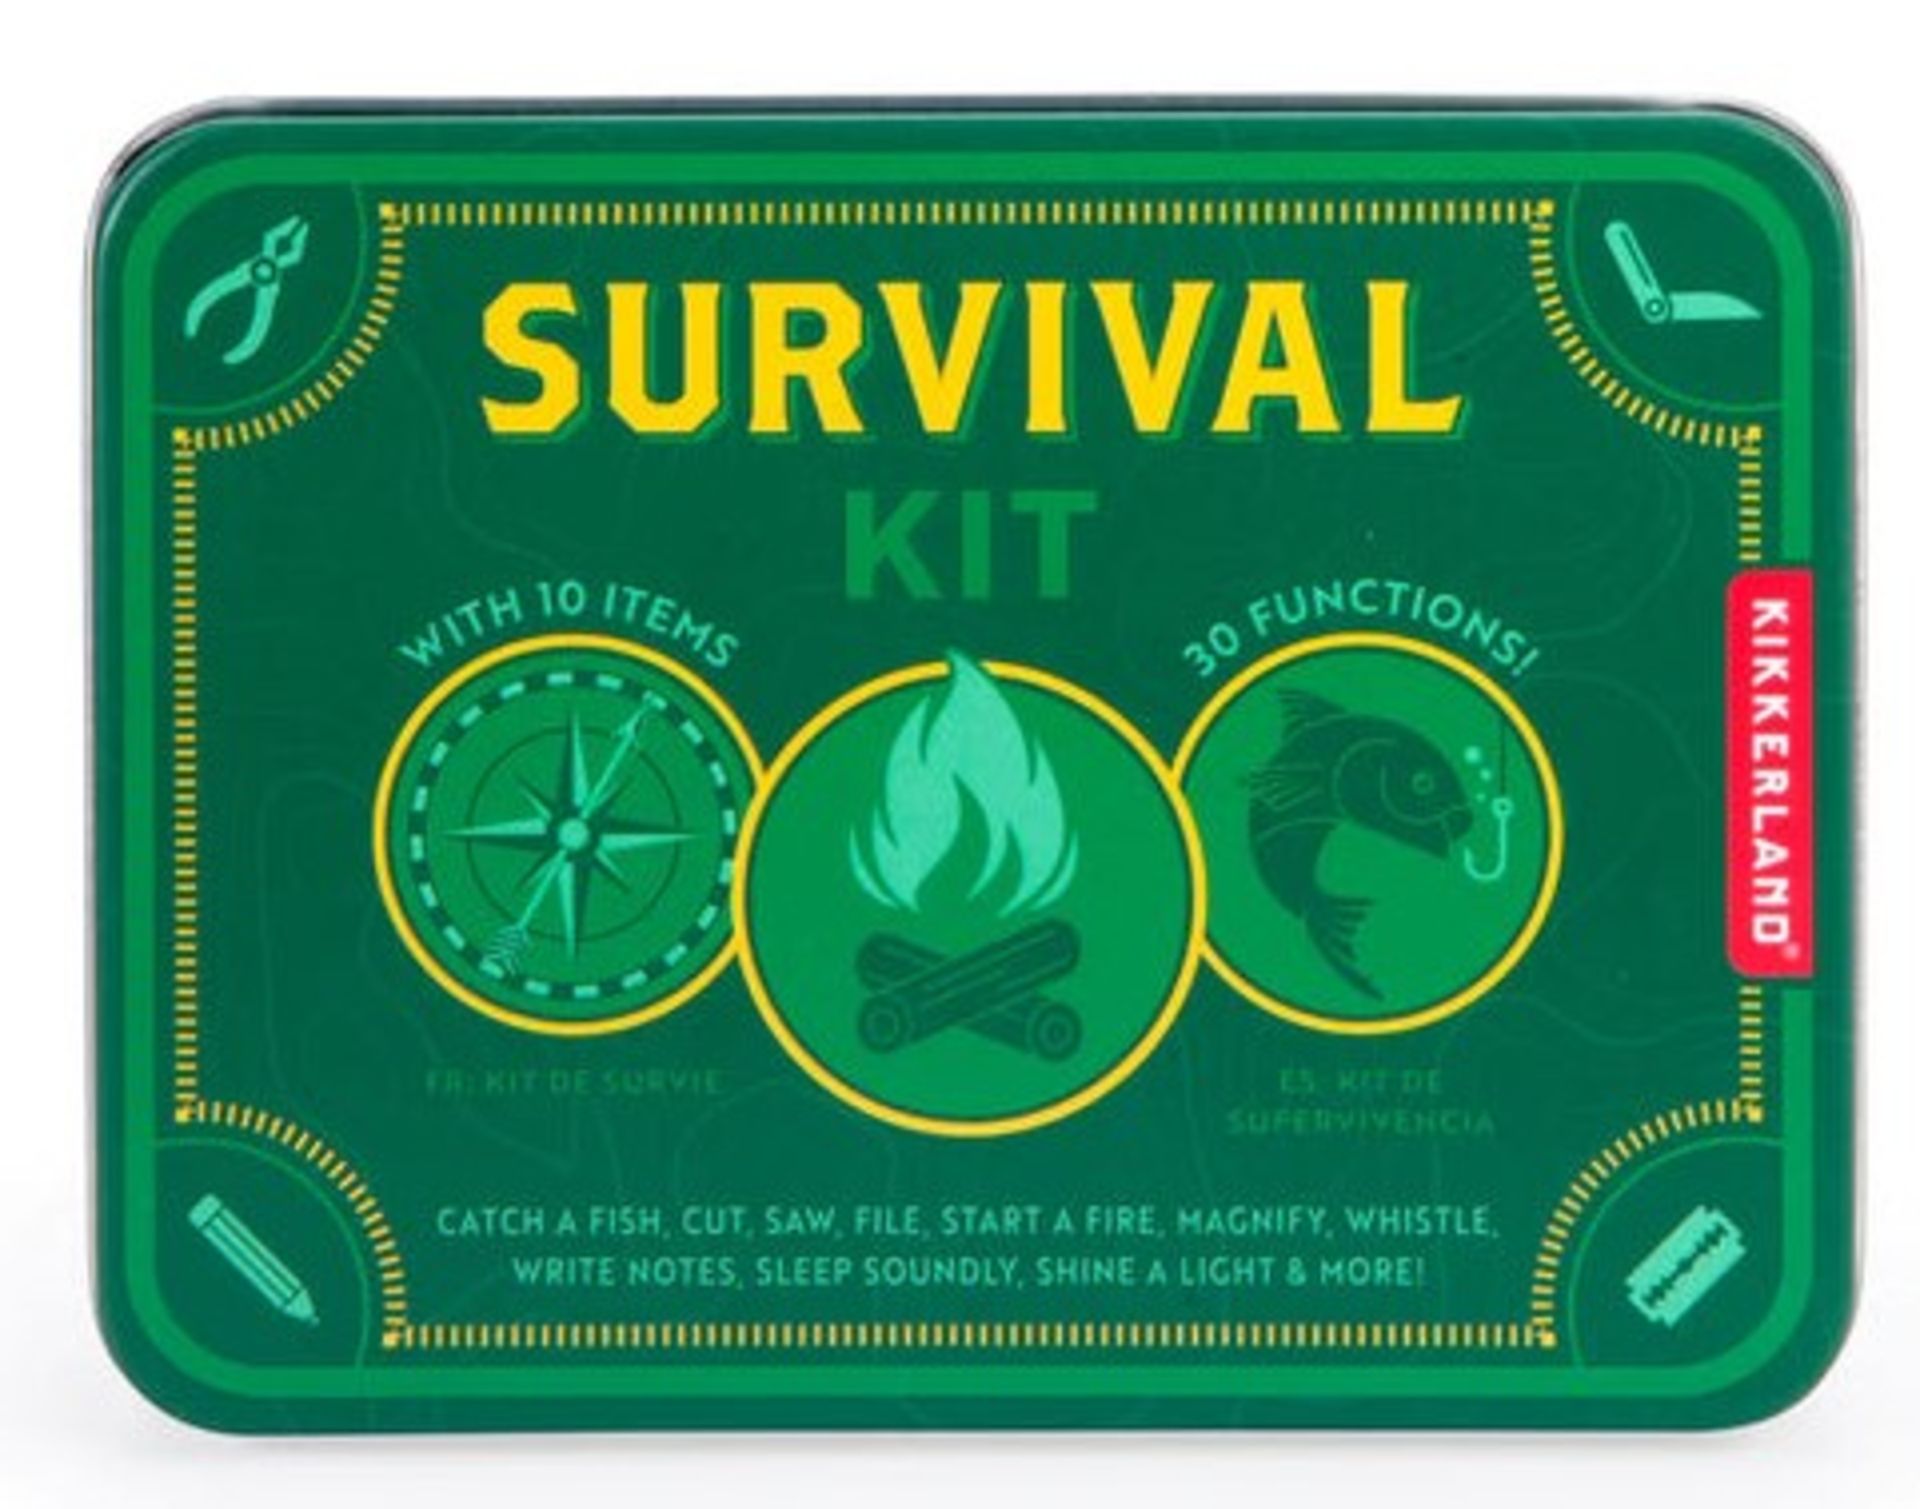 2 x Kikkerland Survival Kits - Each Kit 10 Items With 30 Survival Functions - New Stock - RRP £70 - Image 4 of 5